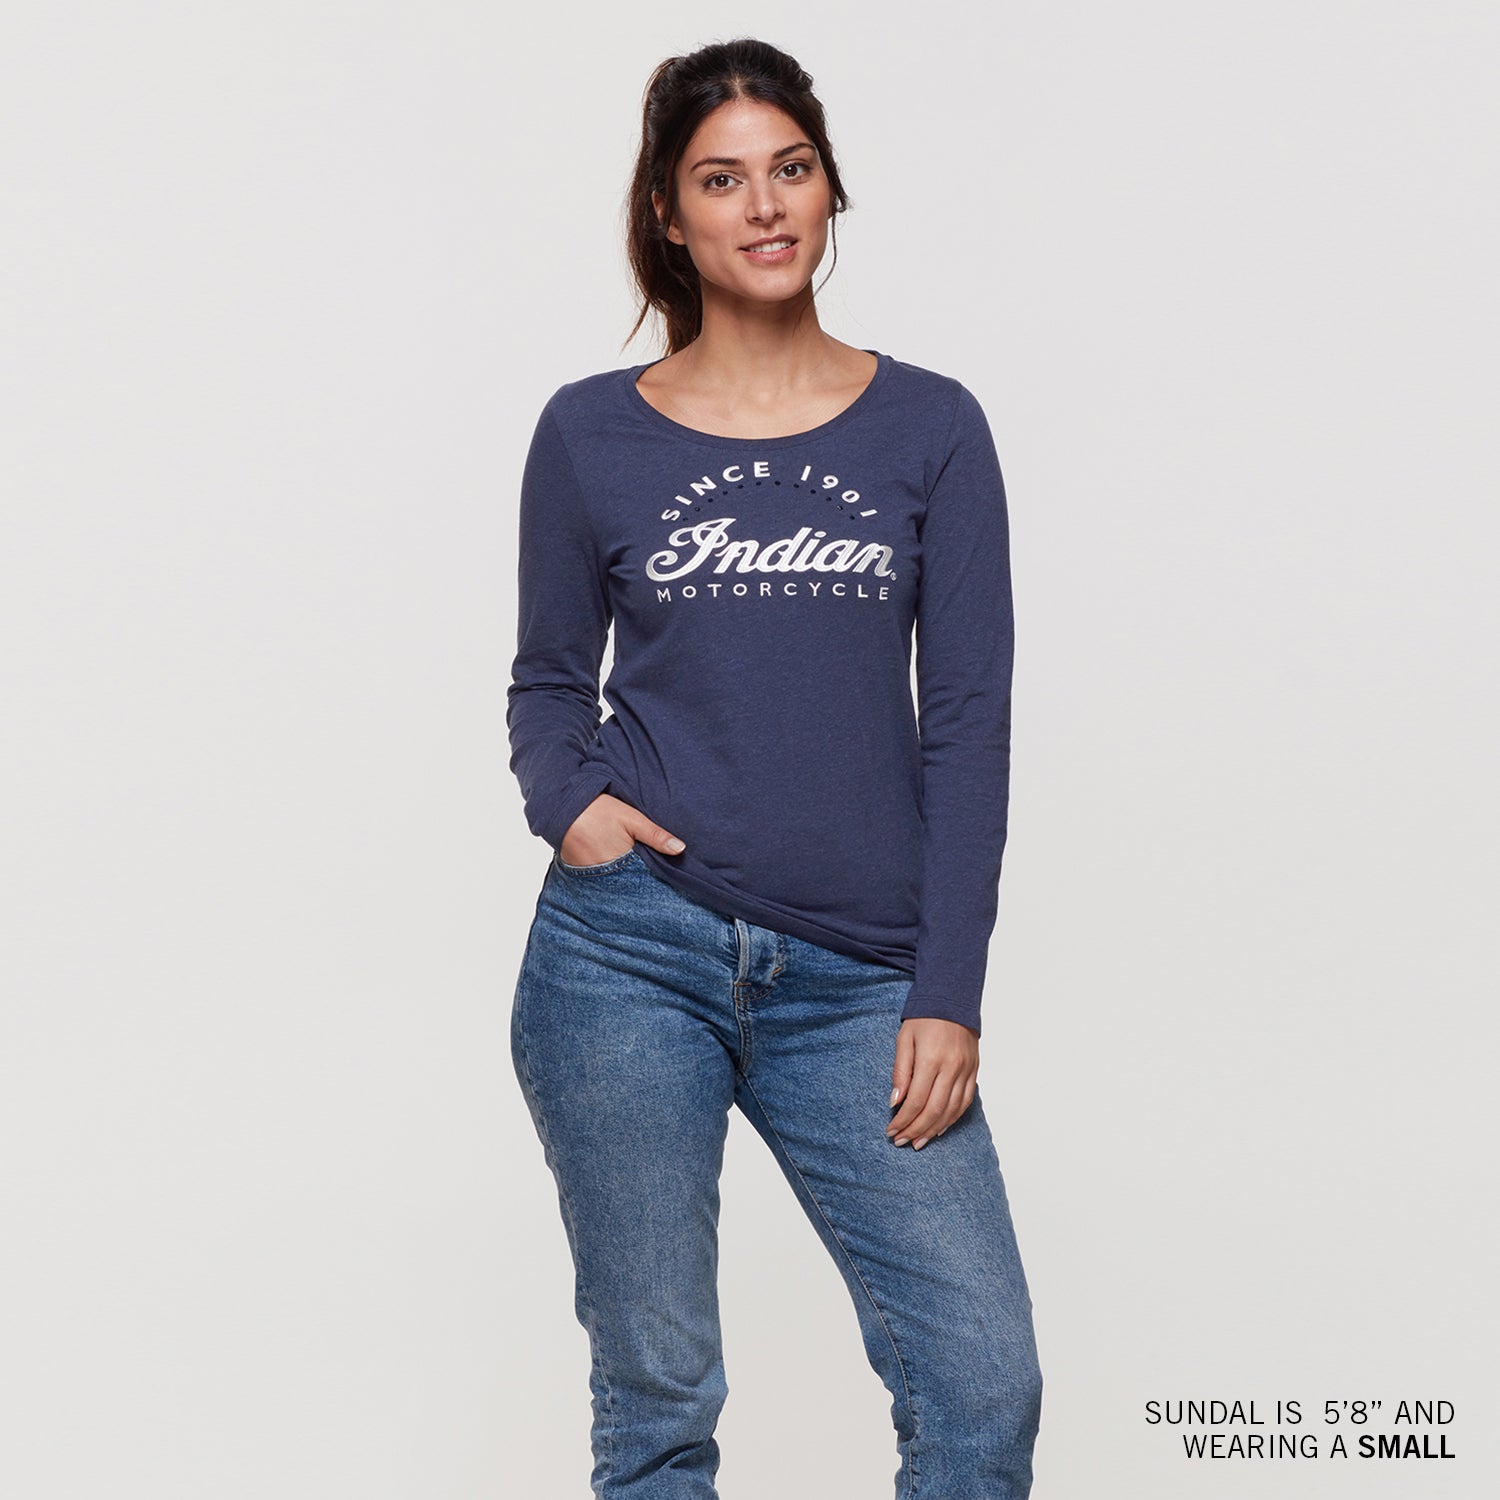 Women's Embroidered Script Long Sleeve Tee, Navy